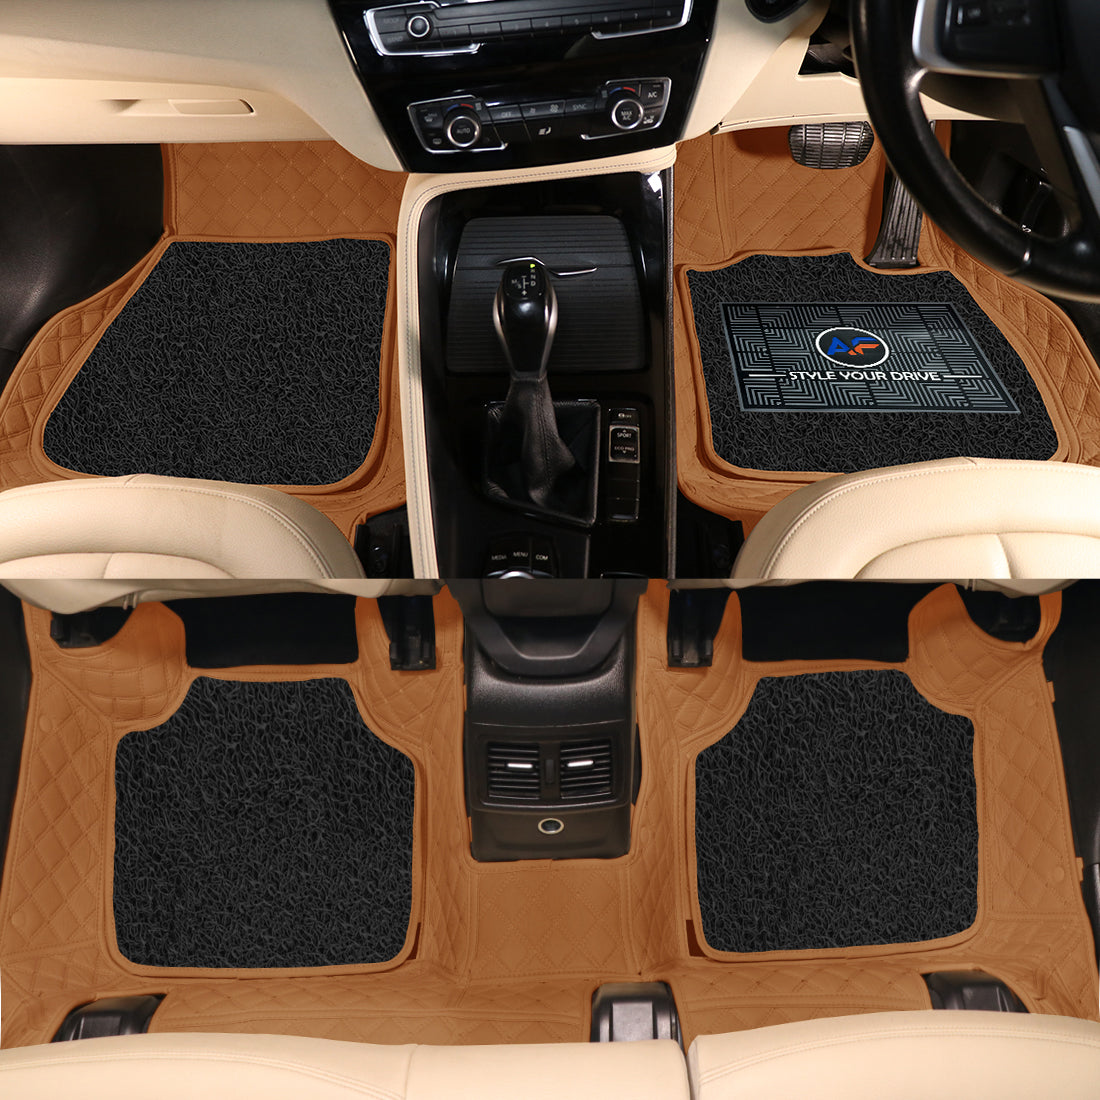 Mercedes C300 2019 7D Luxury Car Mat, All Weather Proof, Anti-Skid, 100% Waterproof & Odorless with Unique Diamond Fish Design (24mm Luxury PU Leather, 2 Rows)